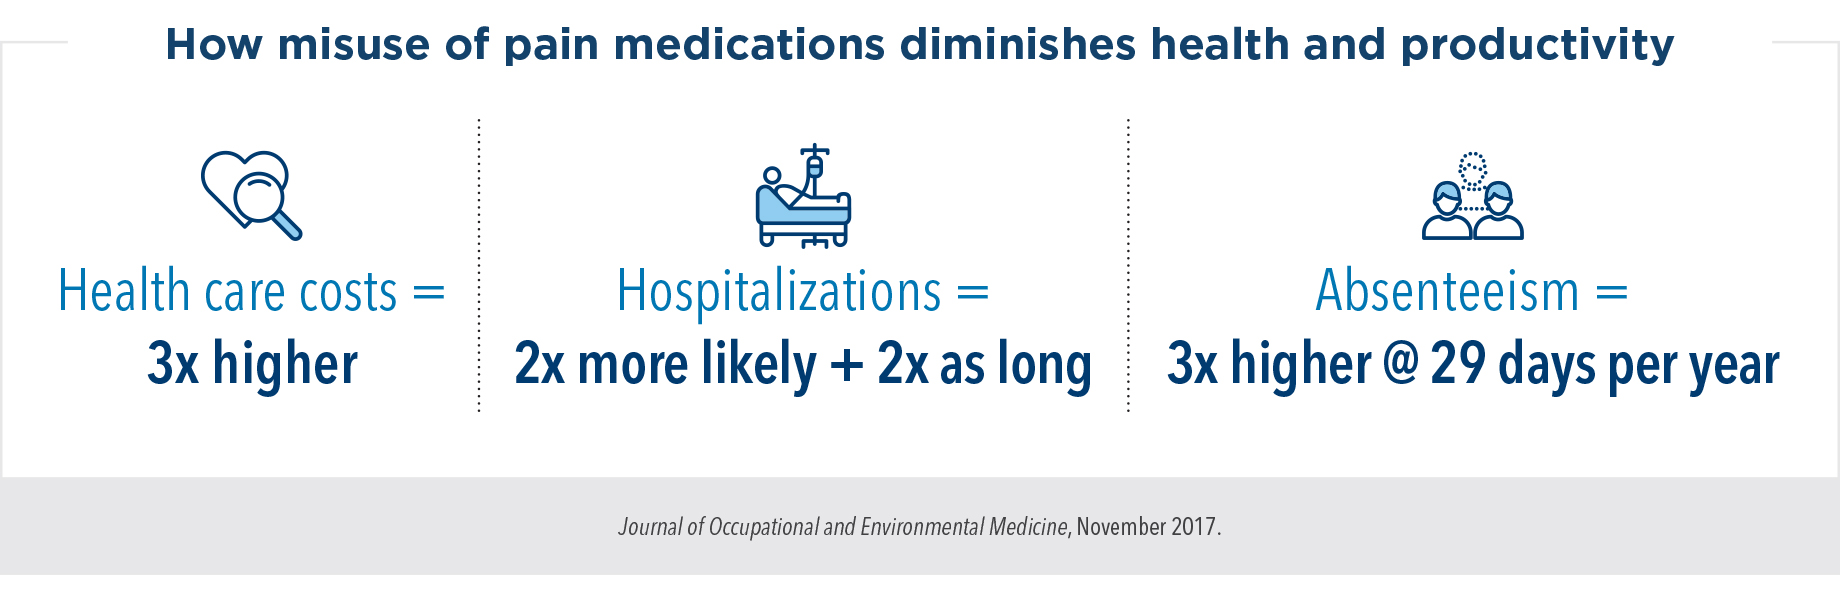 How misuse of pain medications diminishes health and productivity: Health care costs = 3 times higher; hospitalizations = two times more likely and two times as long; absenteeism = three times higher at 29 days per year